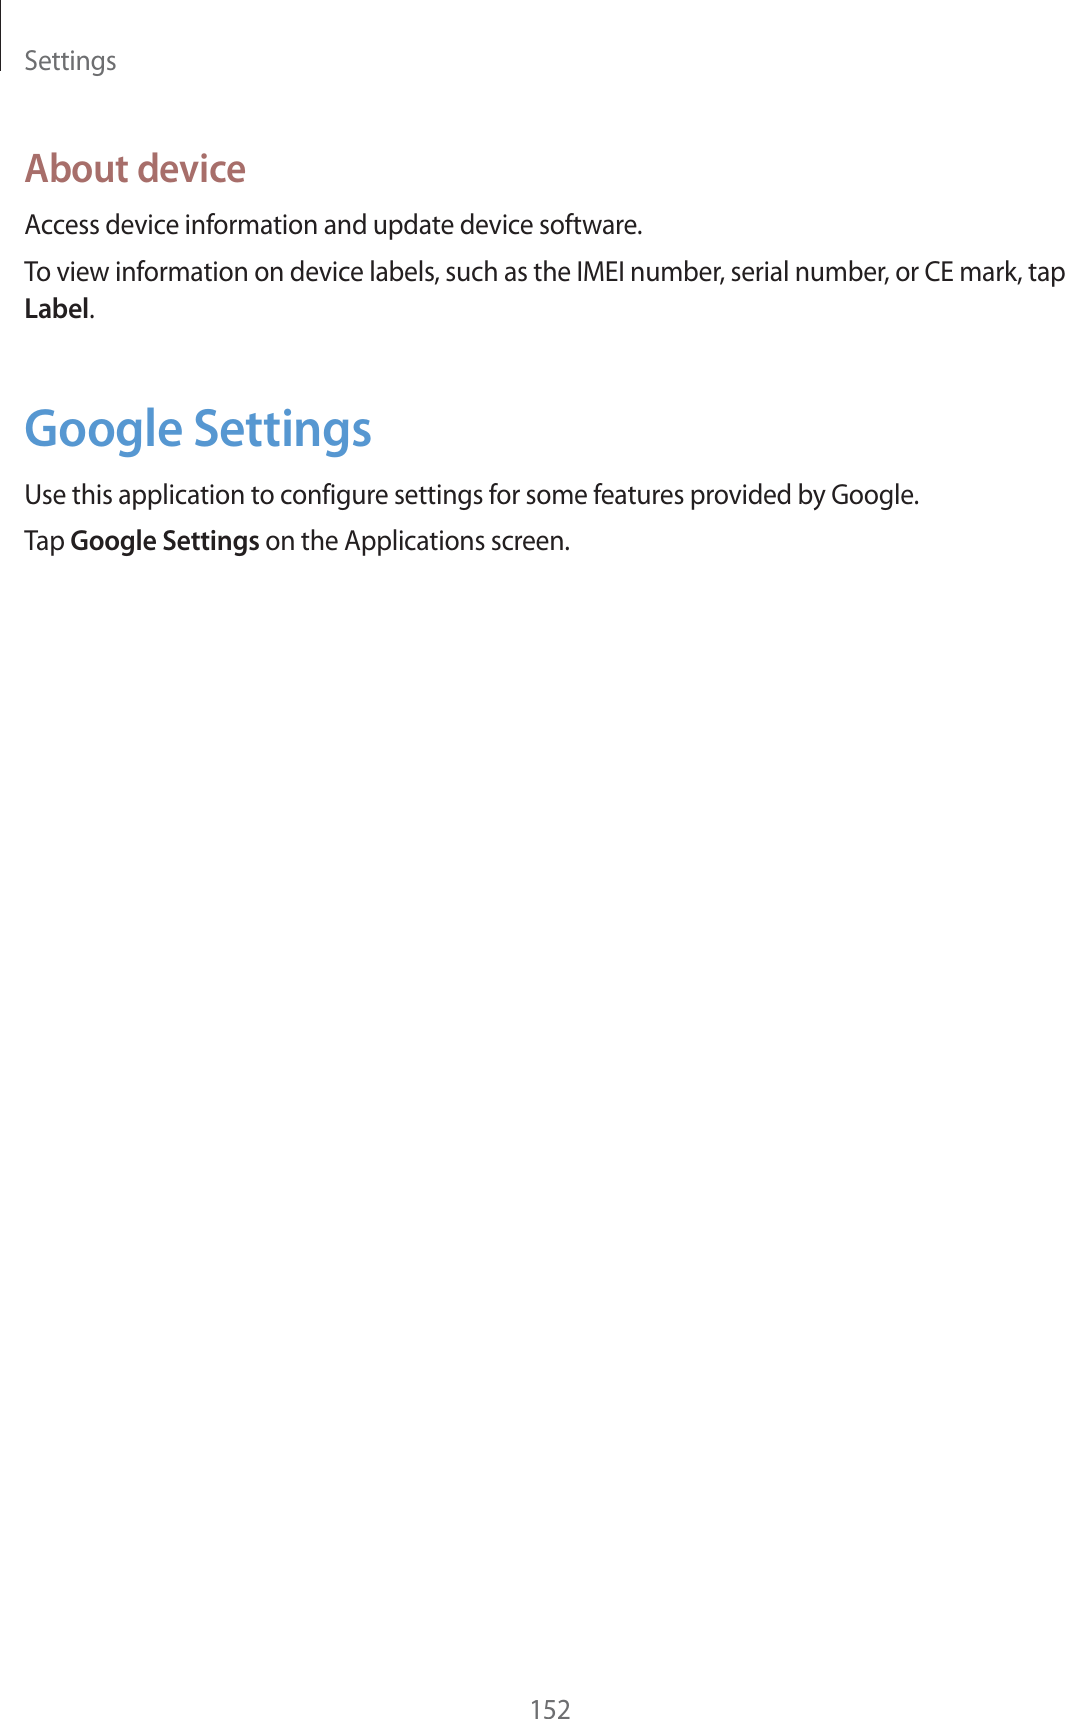 Settings152About deviceAccess device information and update device software.To view information on device labels, such as the IMEI number, serial number, or CE mark, tap Label.Google SettingsUse this application to configure settings for some features provided by Google.Tap Google Settings on the Applications screen.